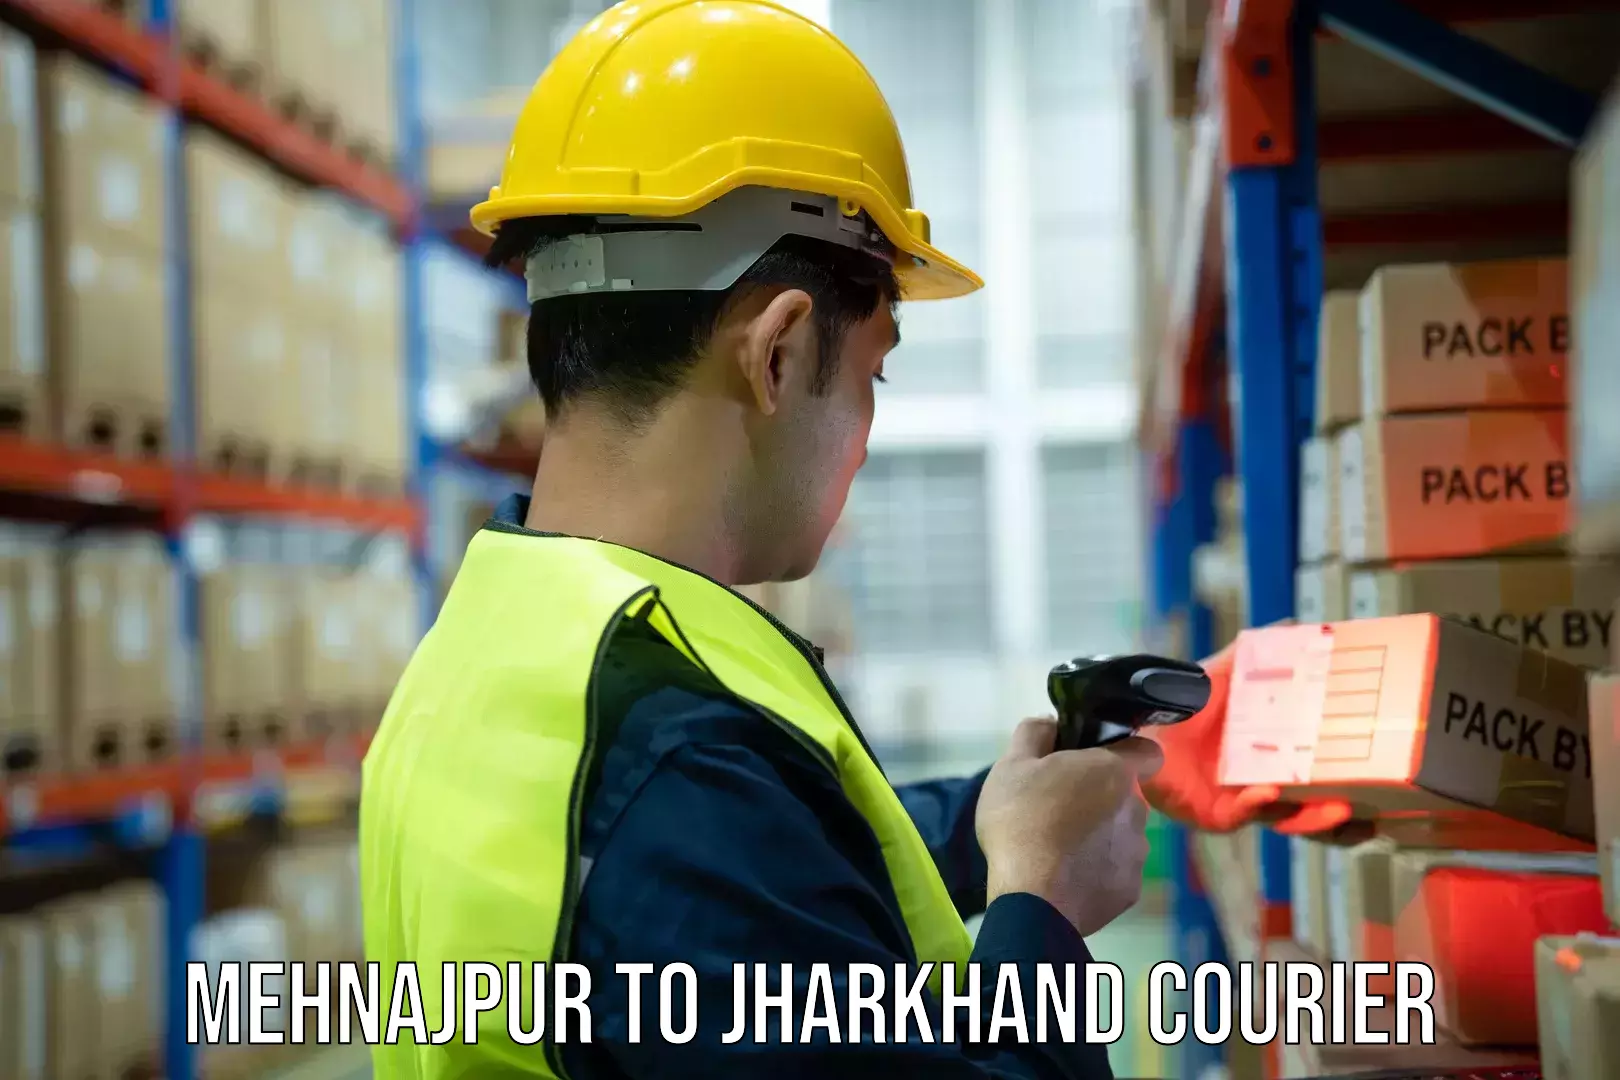 Easy access courier services Mehnajpur to Jharkhand